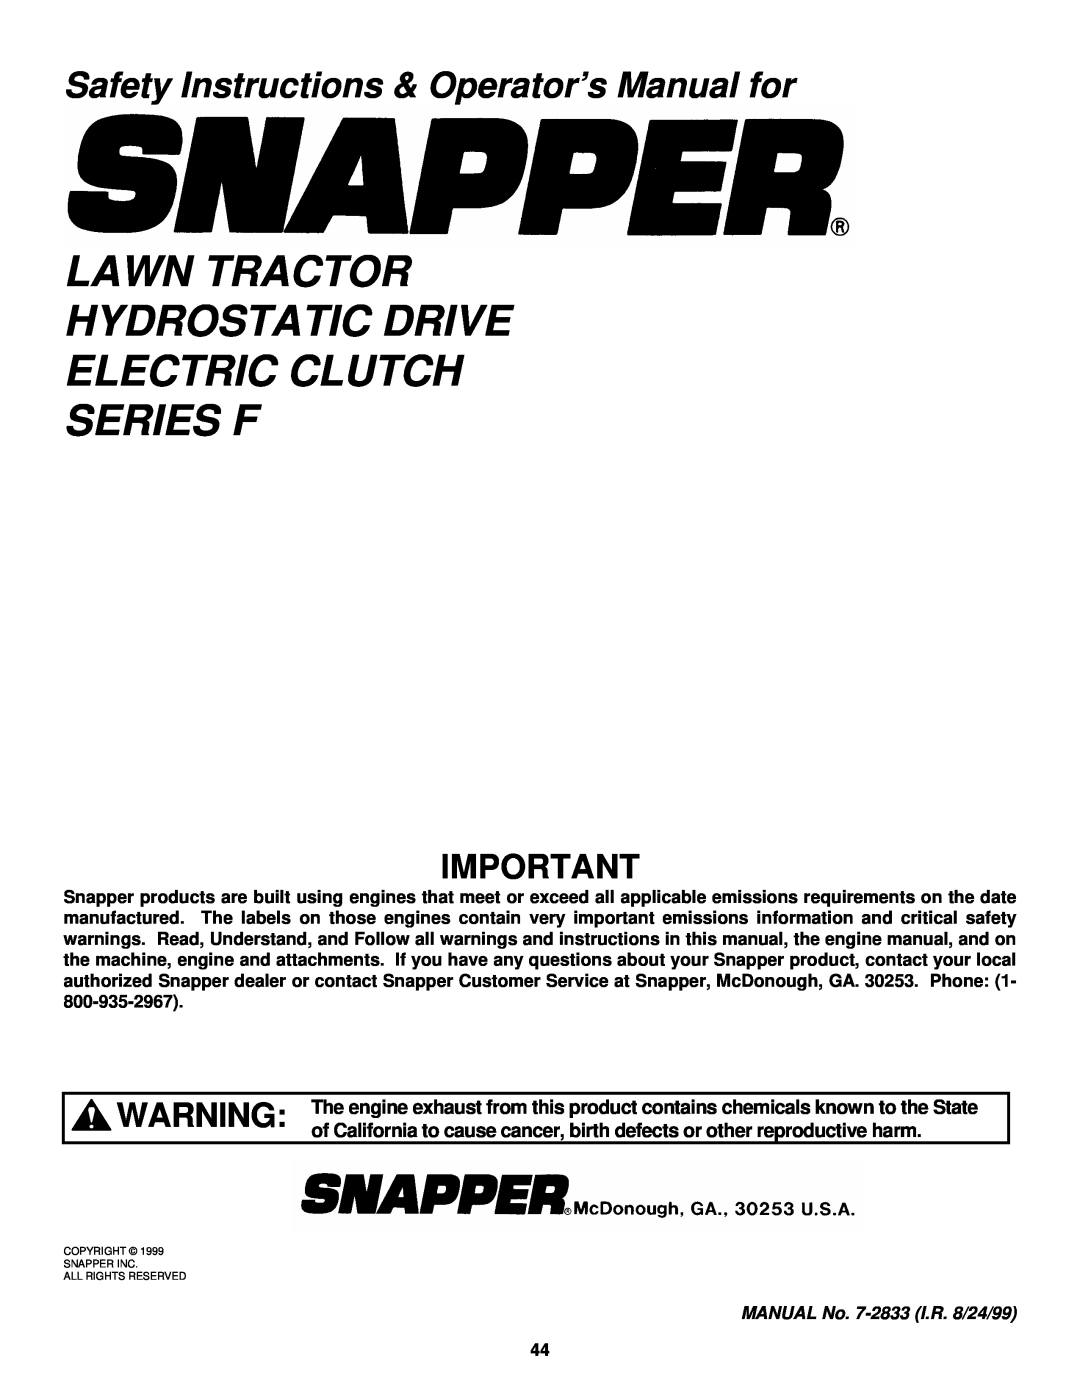 Snapper LT160H42FBV Lawn Tractor Hydrostatic Drive Electric Clutch Series F, Safety Instructions & Operator’s Manual for 